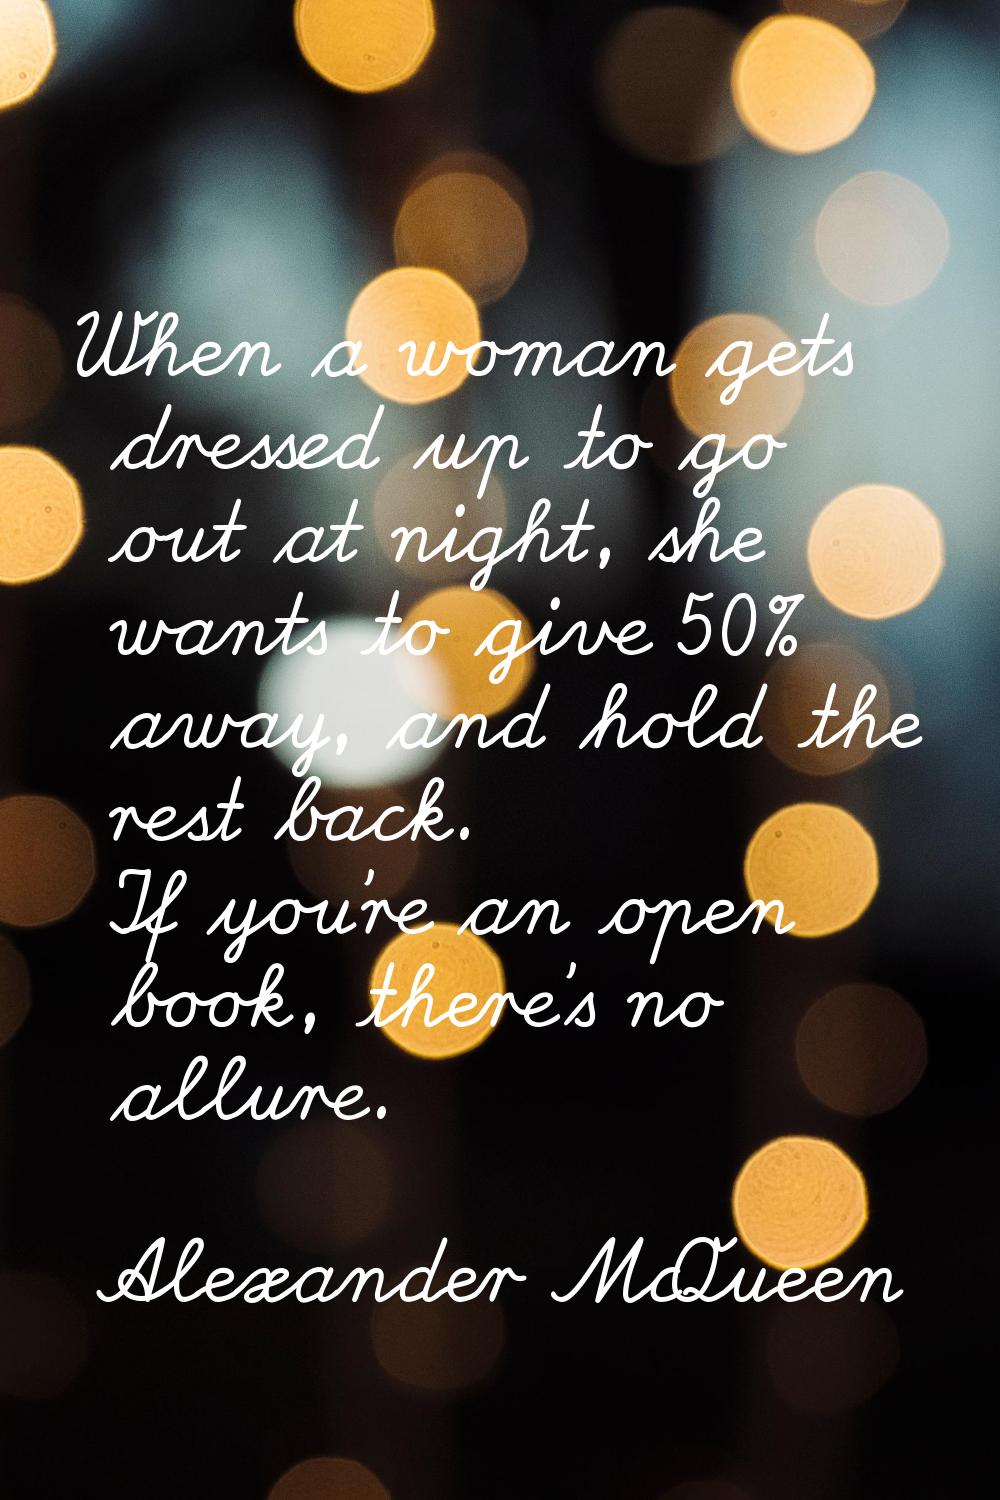 When a woman gets dressed up to go out at night, she wants to give 50% away, and hold the rest back